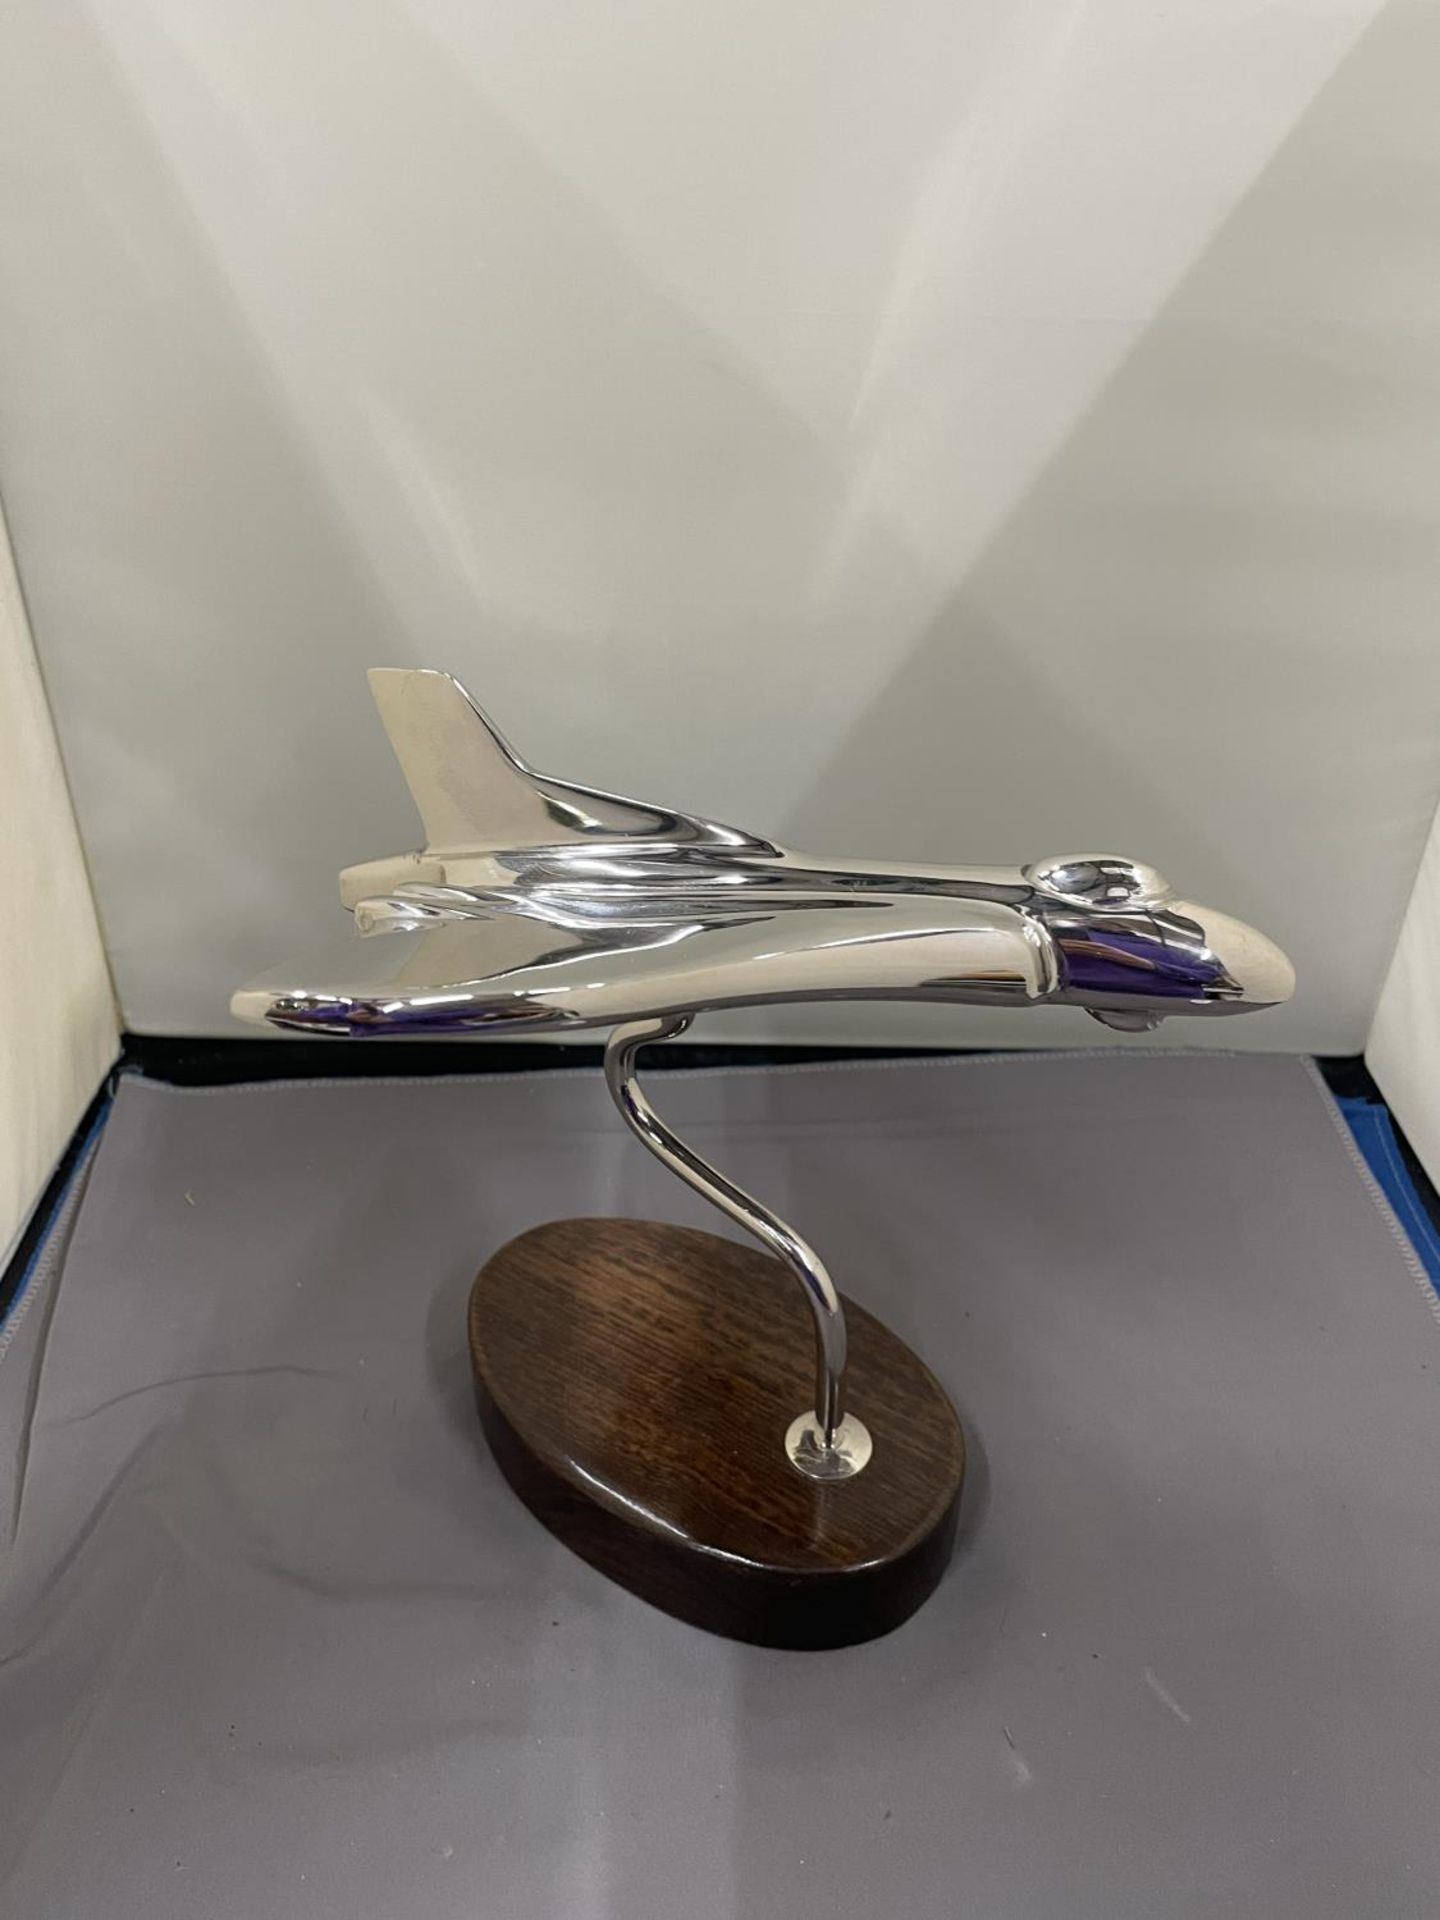 A CHROME VULCAN BOMBER ON A WOODEN BASE - Image 5 of 8